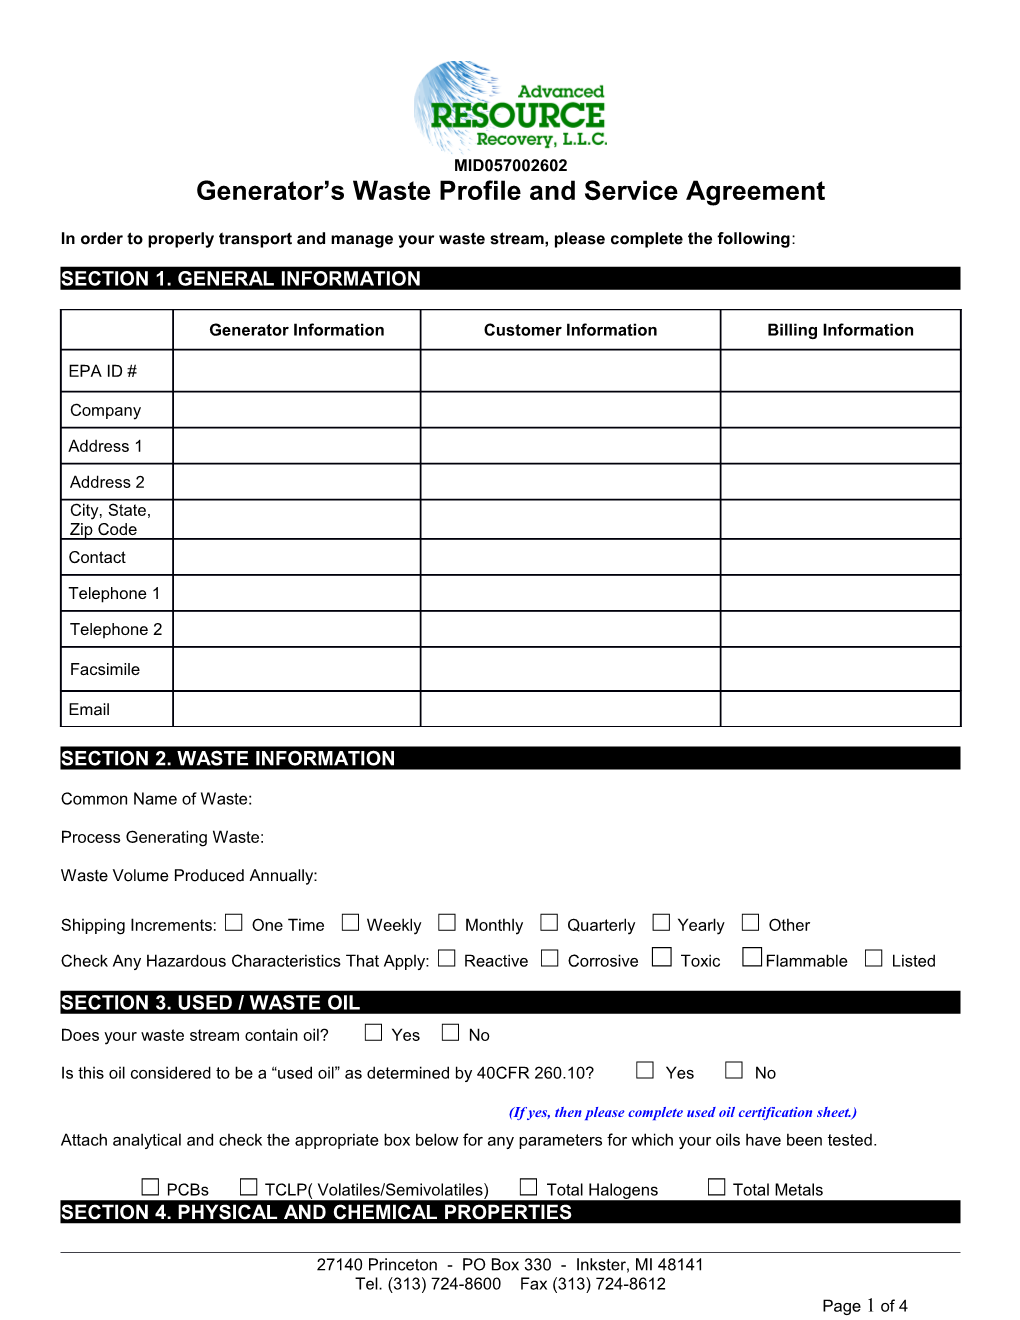 In Order to Properly Transport and Manage Your Waste Stream, Please Complete This Form